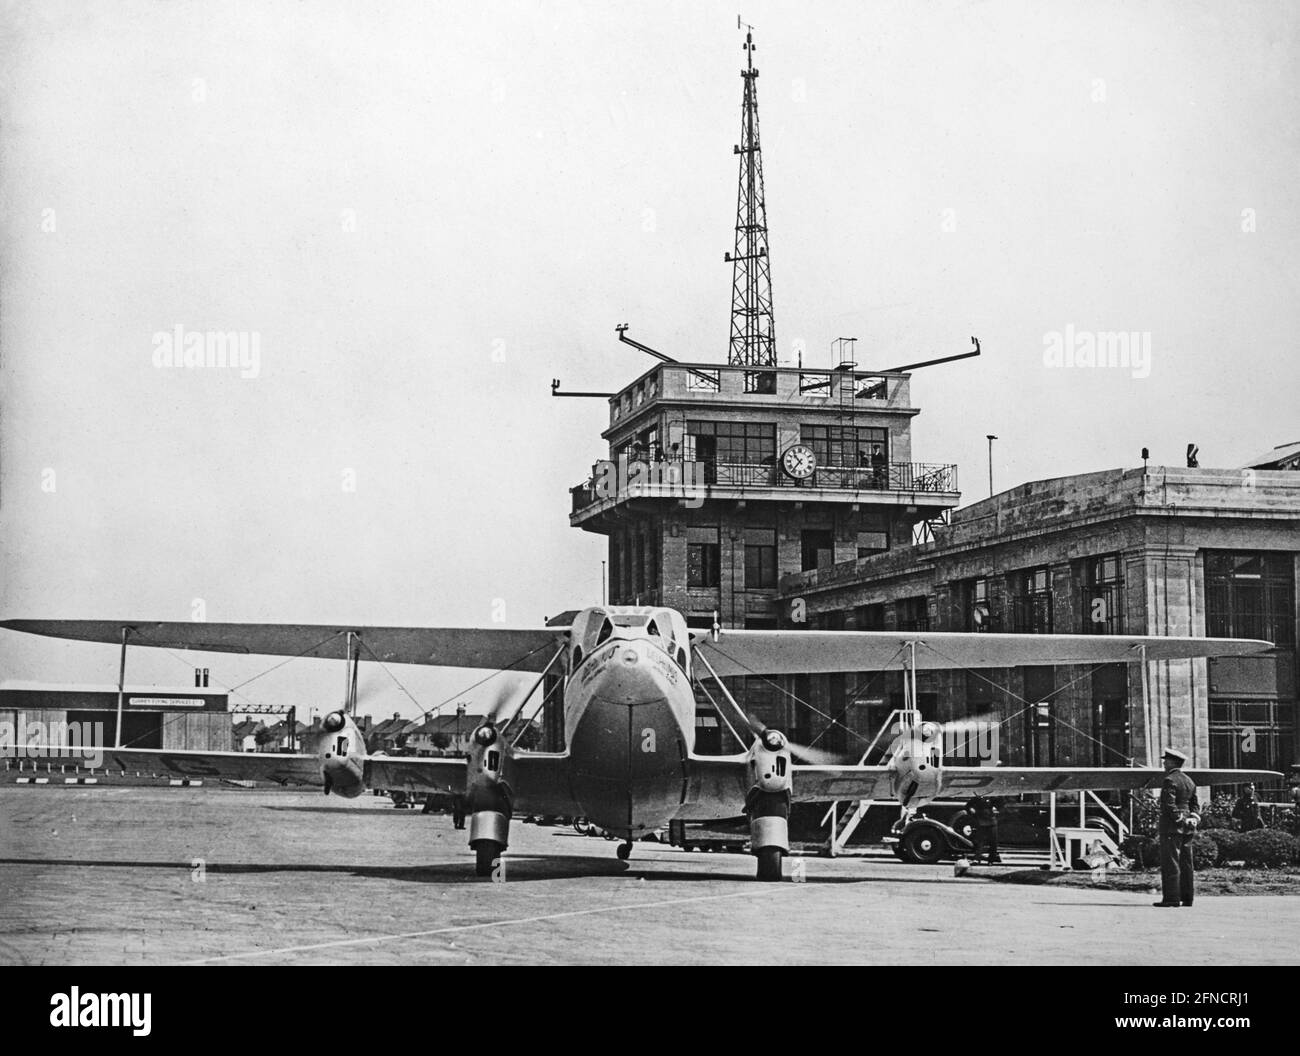 Vintage black and white photograph showing an Imperial Airways De Havilland DH.86 Express, registration G-ACPL and named 'Delphinus', at Croydon Airport, London, in the 1930s. The airport control tower behind. Stock Photo